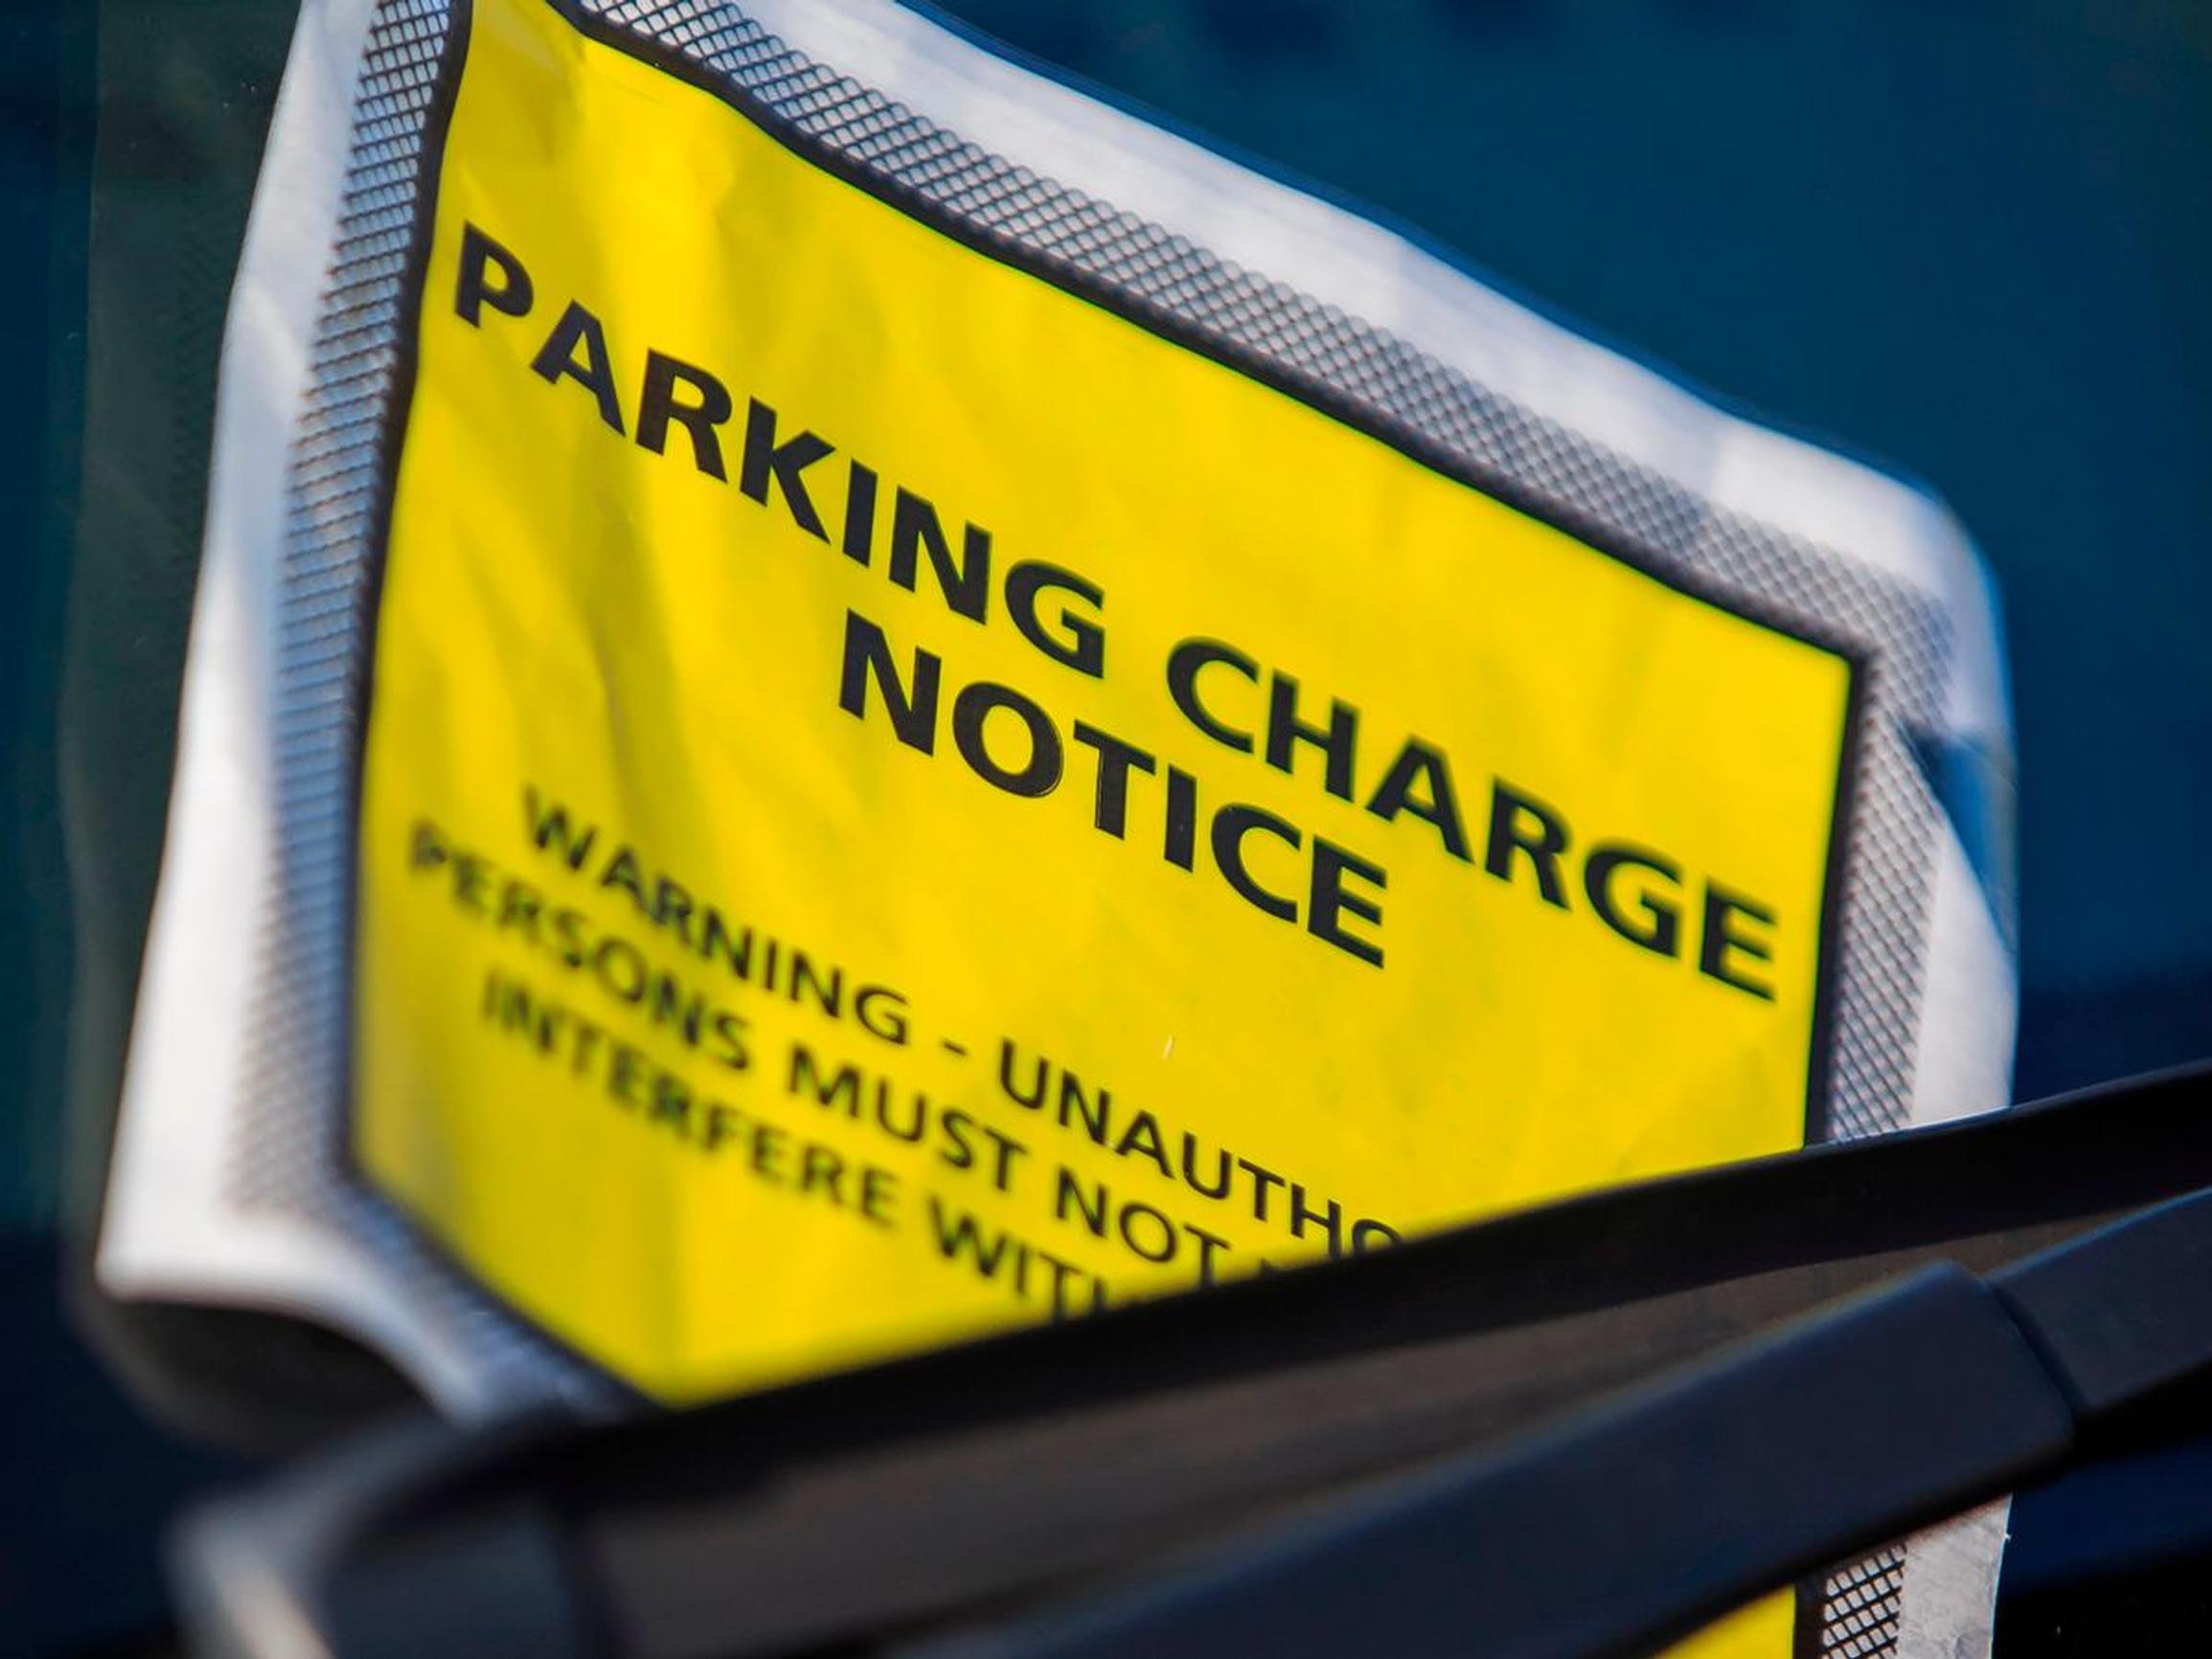 Concern at rising number of private parking notices